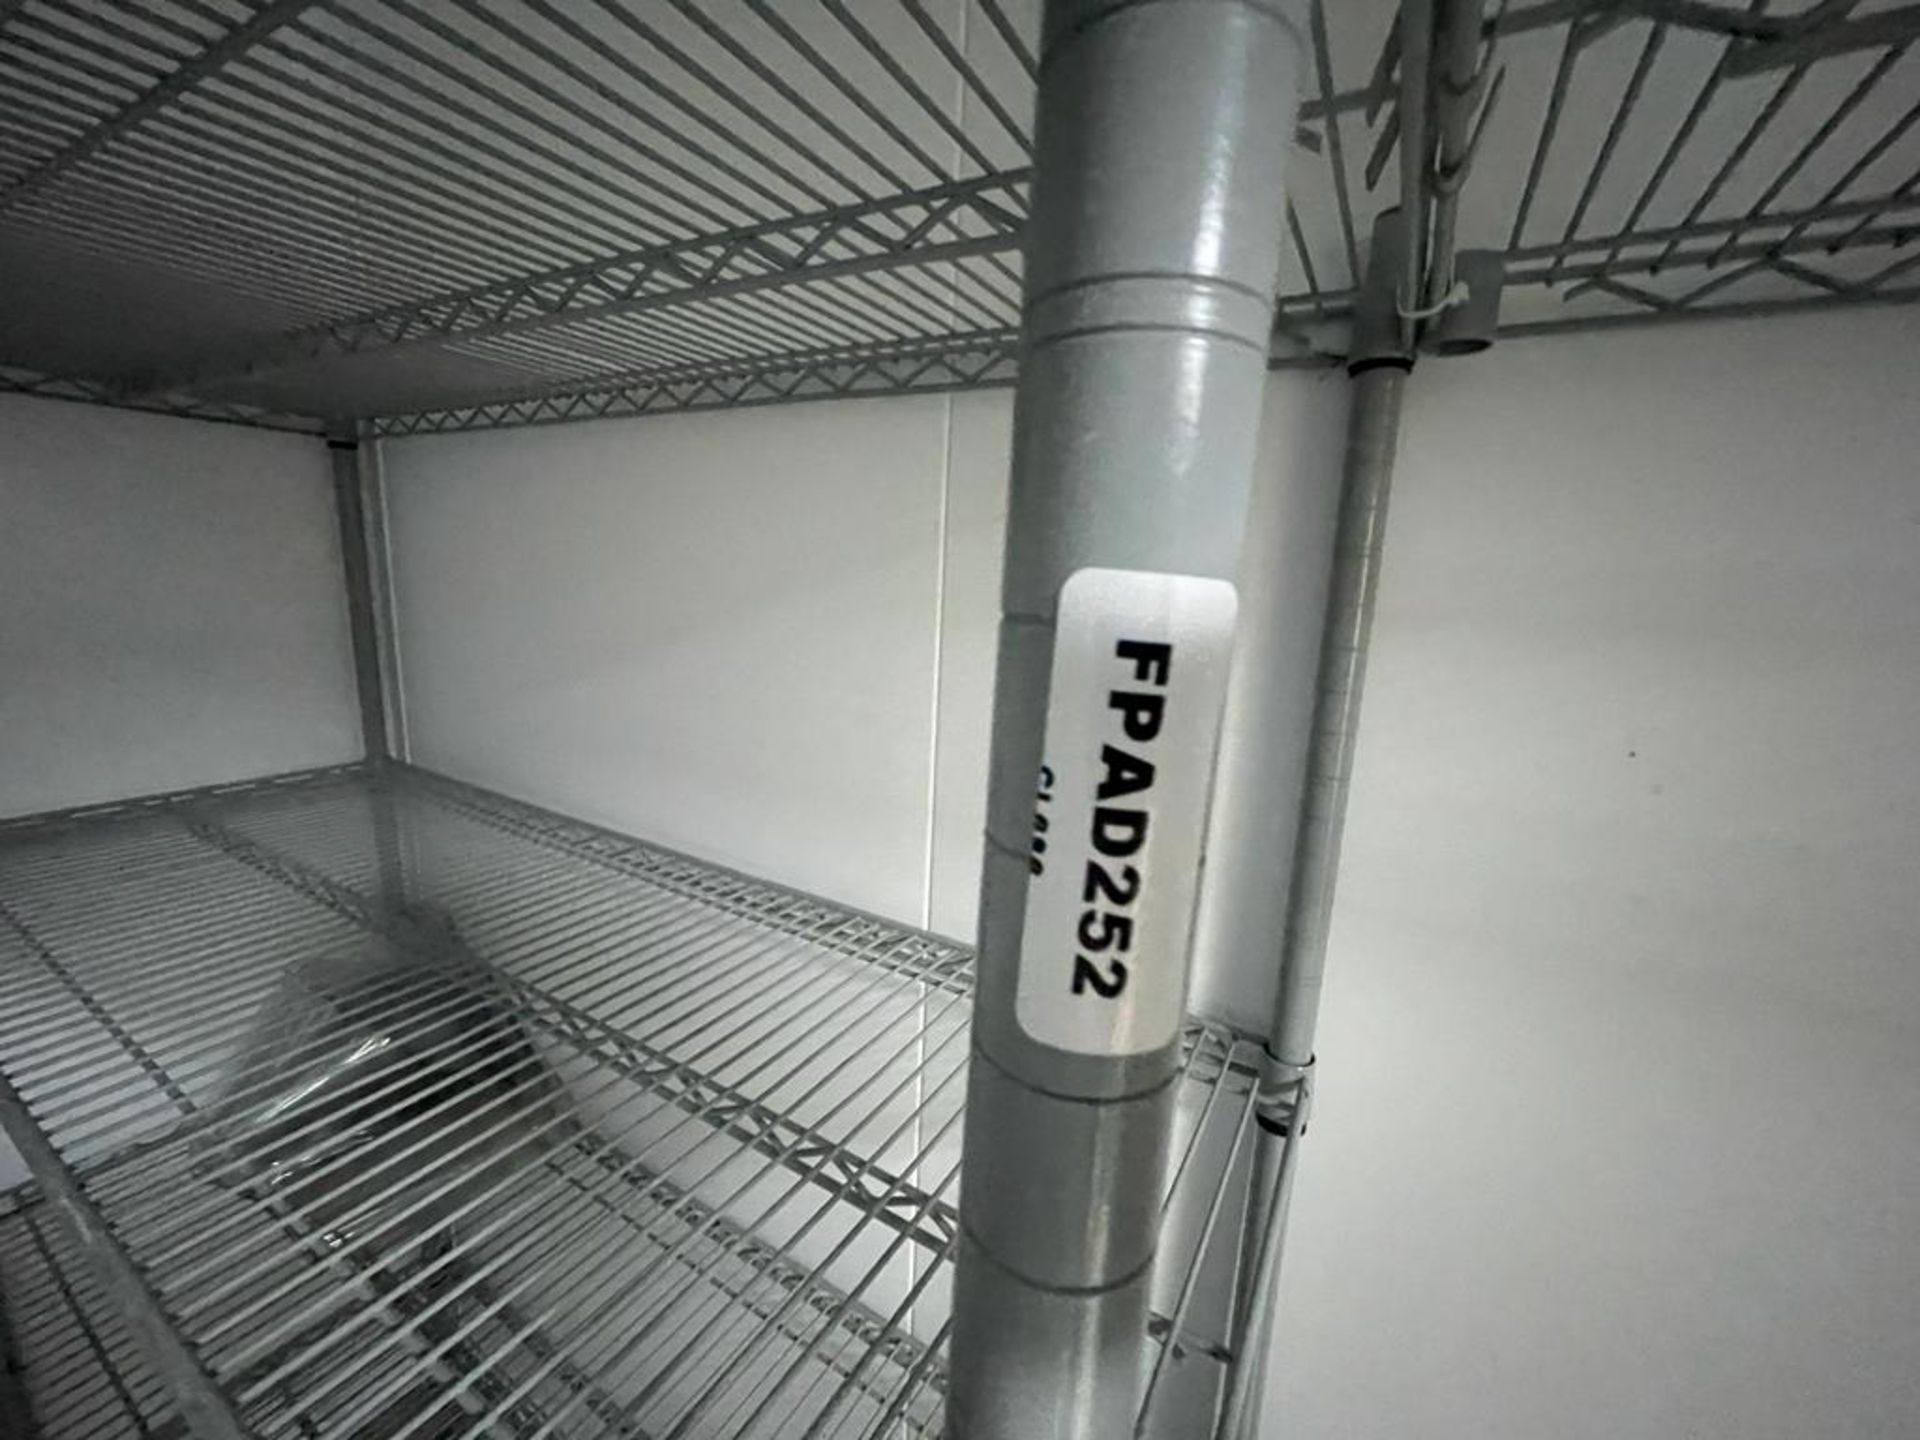 3 x Cold Room Coated Wire Shelving Units -Ref: BK252 - CL686 - - Image 2 of 5